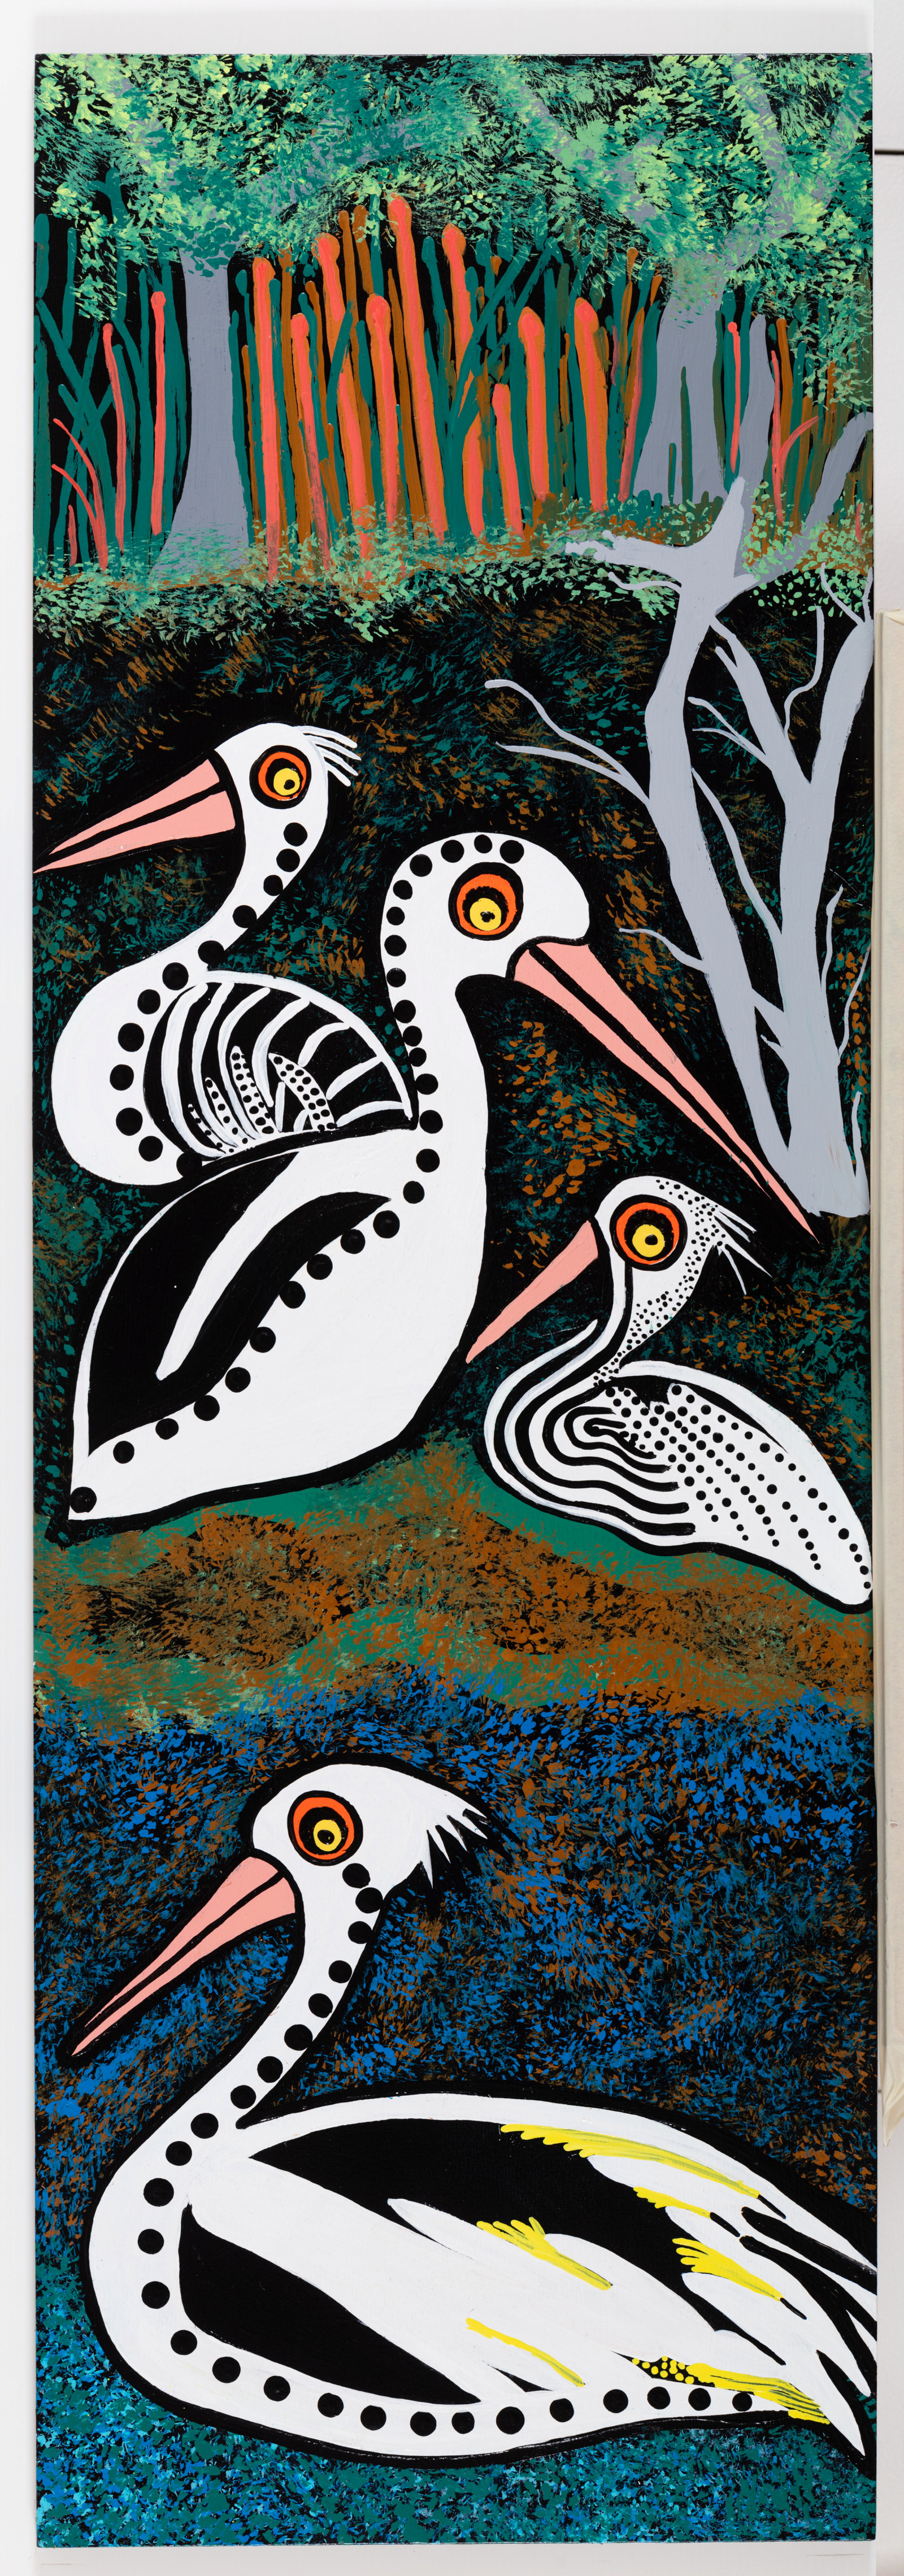 Pelican Island, Lorraine Brown and Narelle Thomas, 2022, acrylic on plywood board, 122.5cm x 41cm
The Island is very significant to our pelicans. They perch here every day.